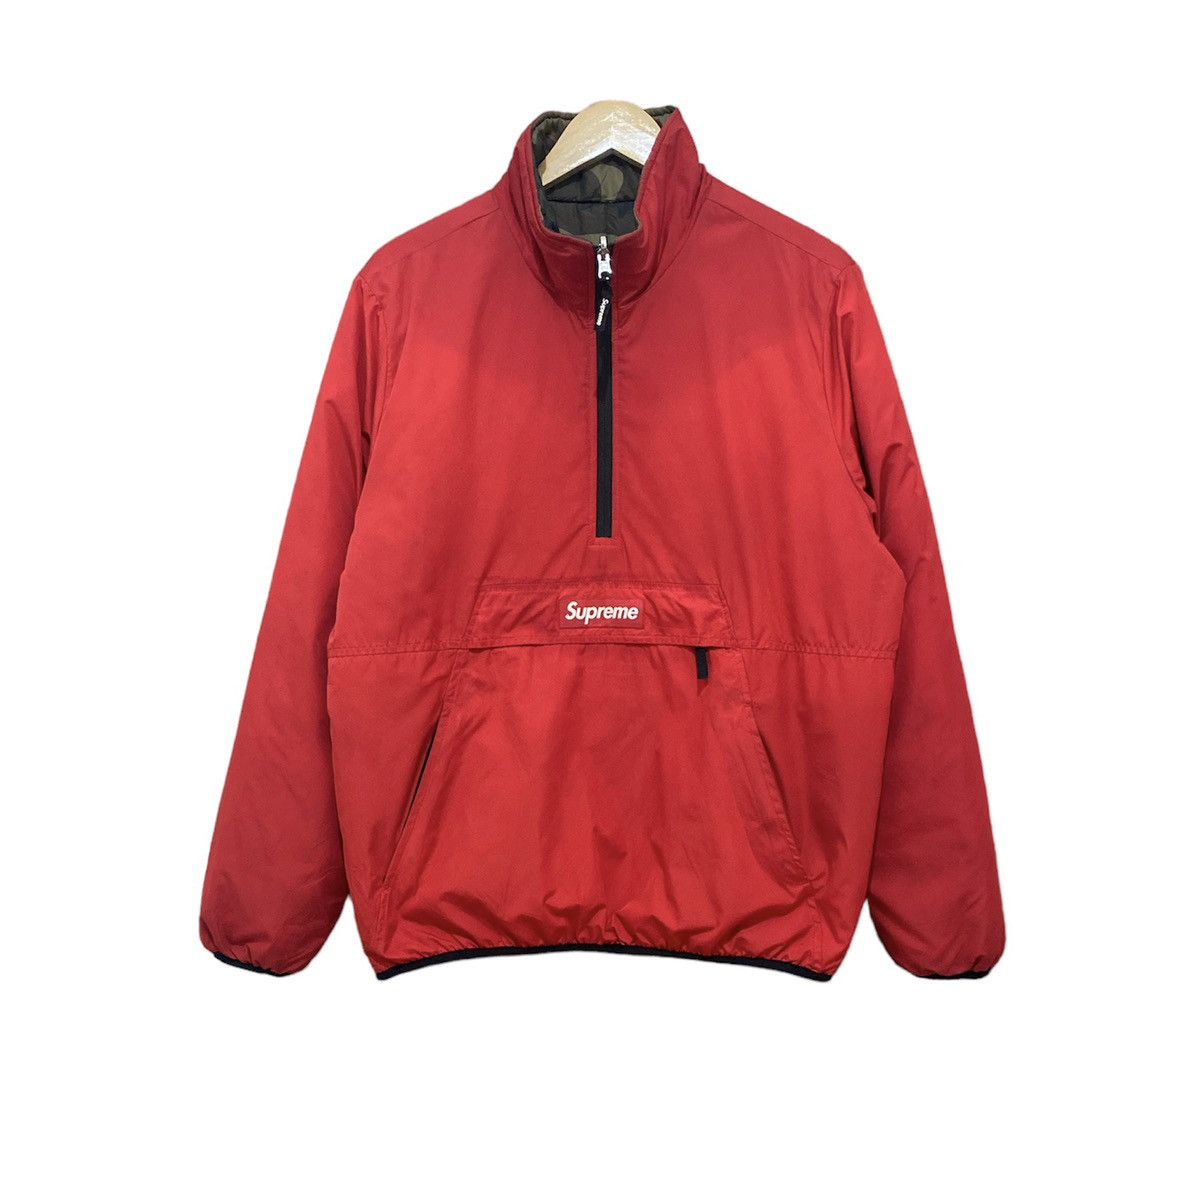 Supreme Fw15 Reversible Pullover Puffer Jacket - 1